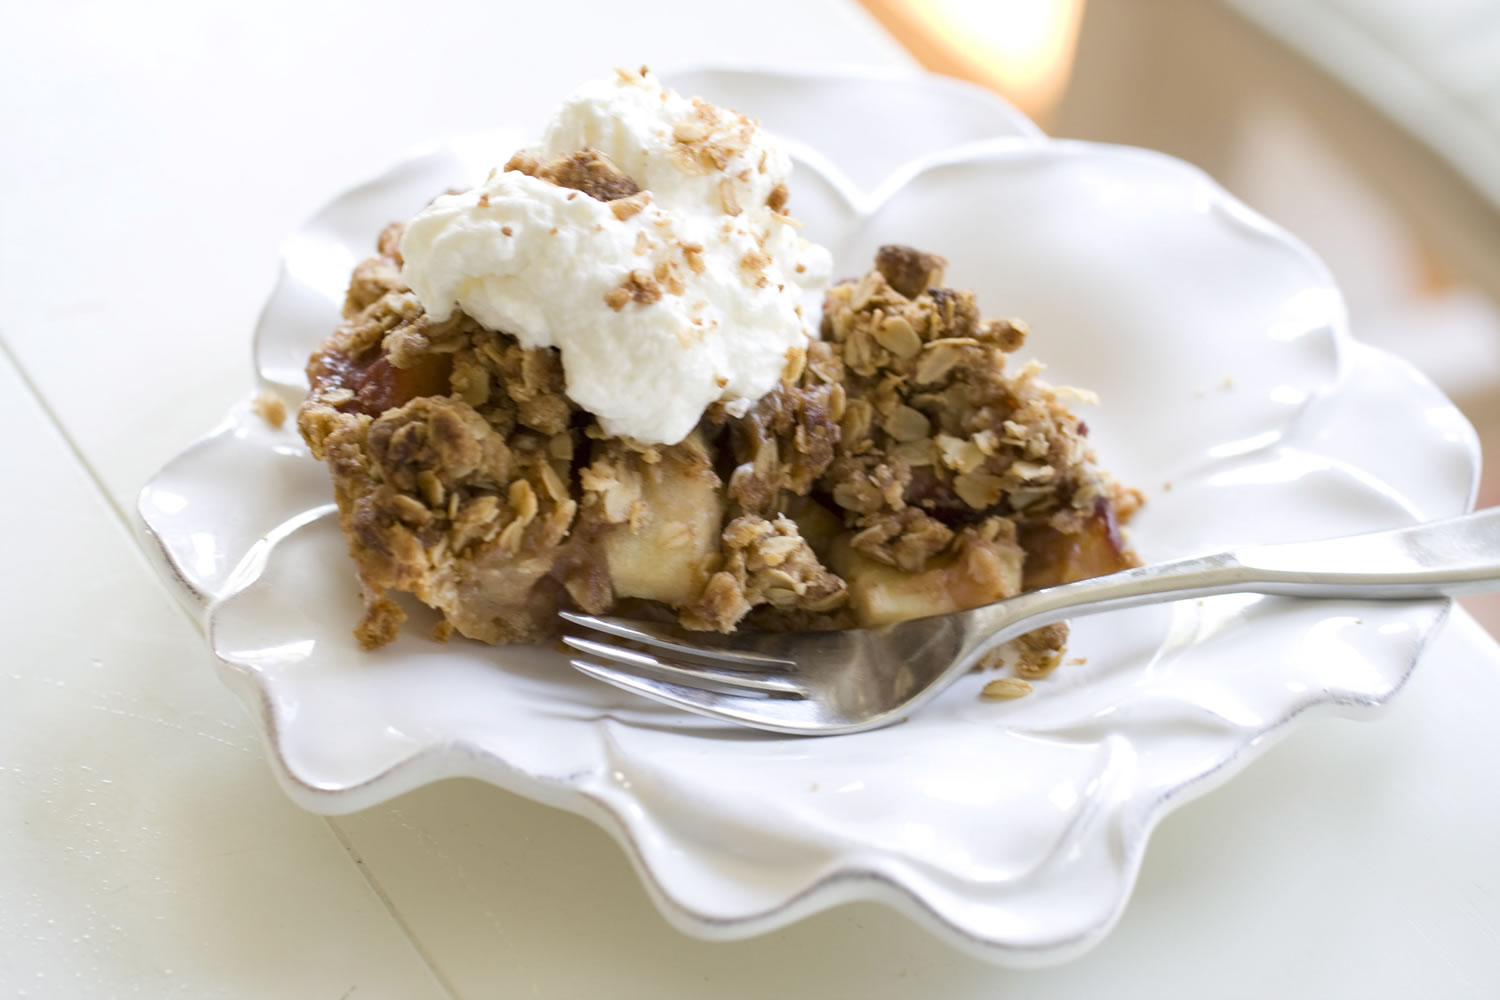 A pie made of plums, peaches and apples topped with cream, brown sugar and oat crumble streusel is baked in a purchased crust in Concord, N.H.